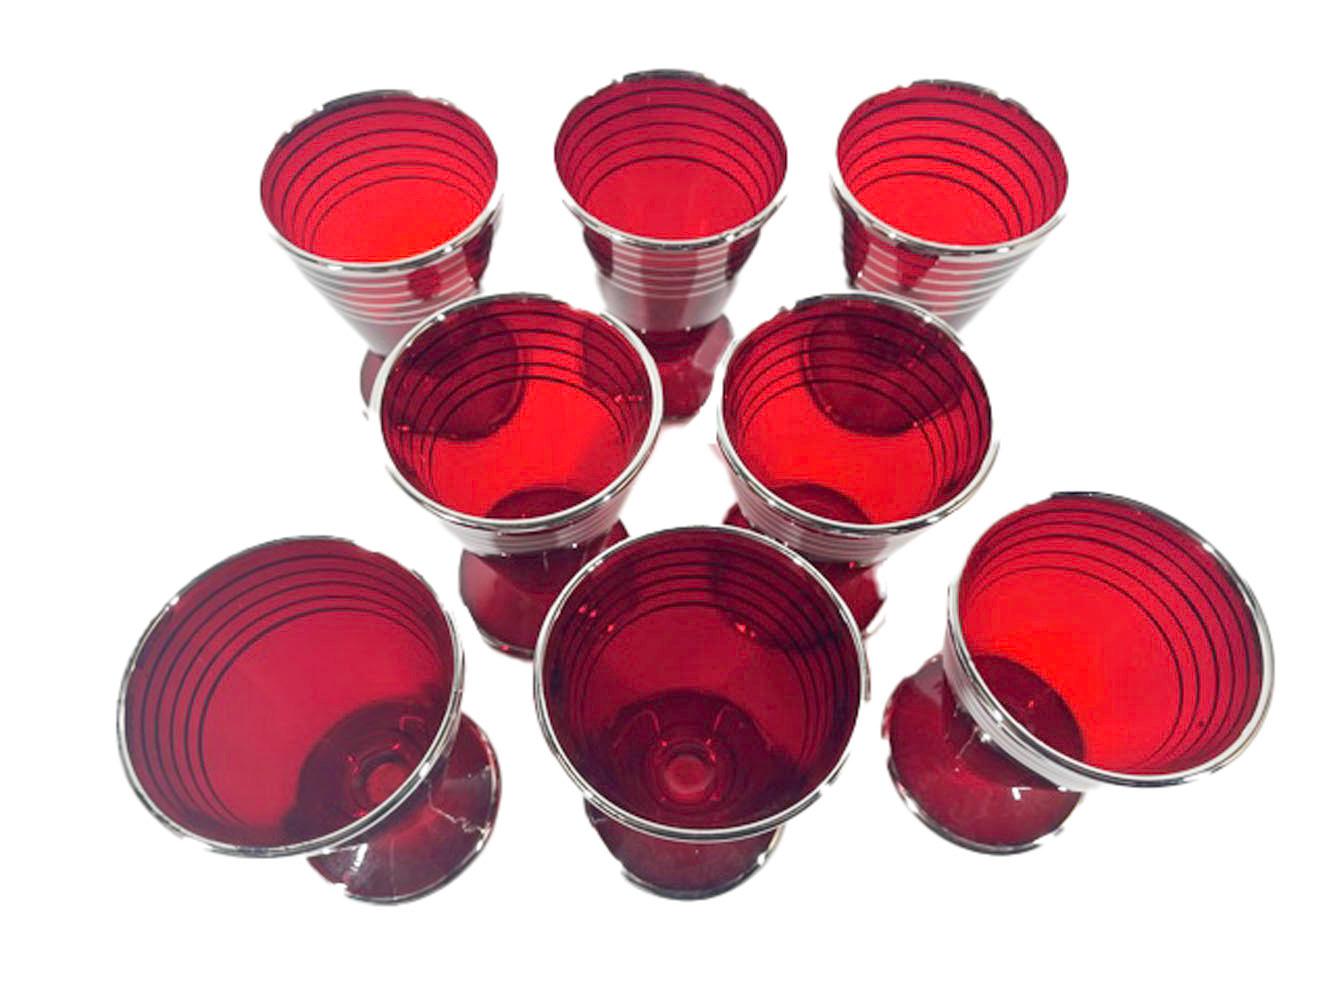 Art Deco Paden City Glass Ruby Red Cocktail Shaker Set with Silver Bands 5